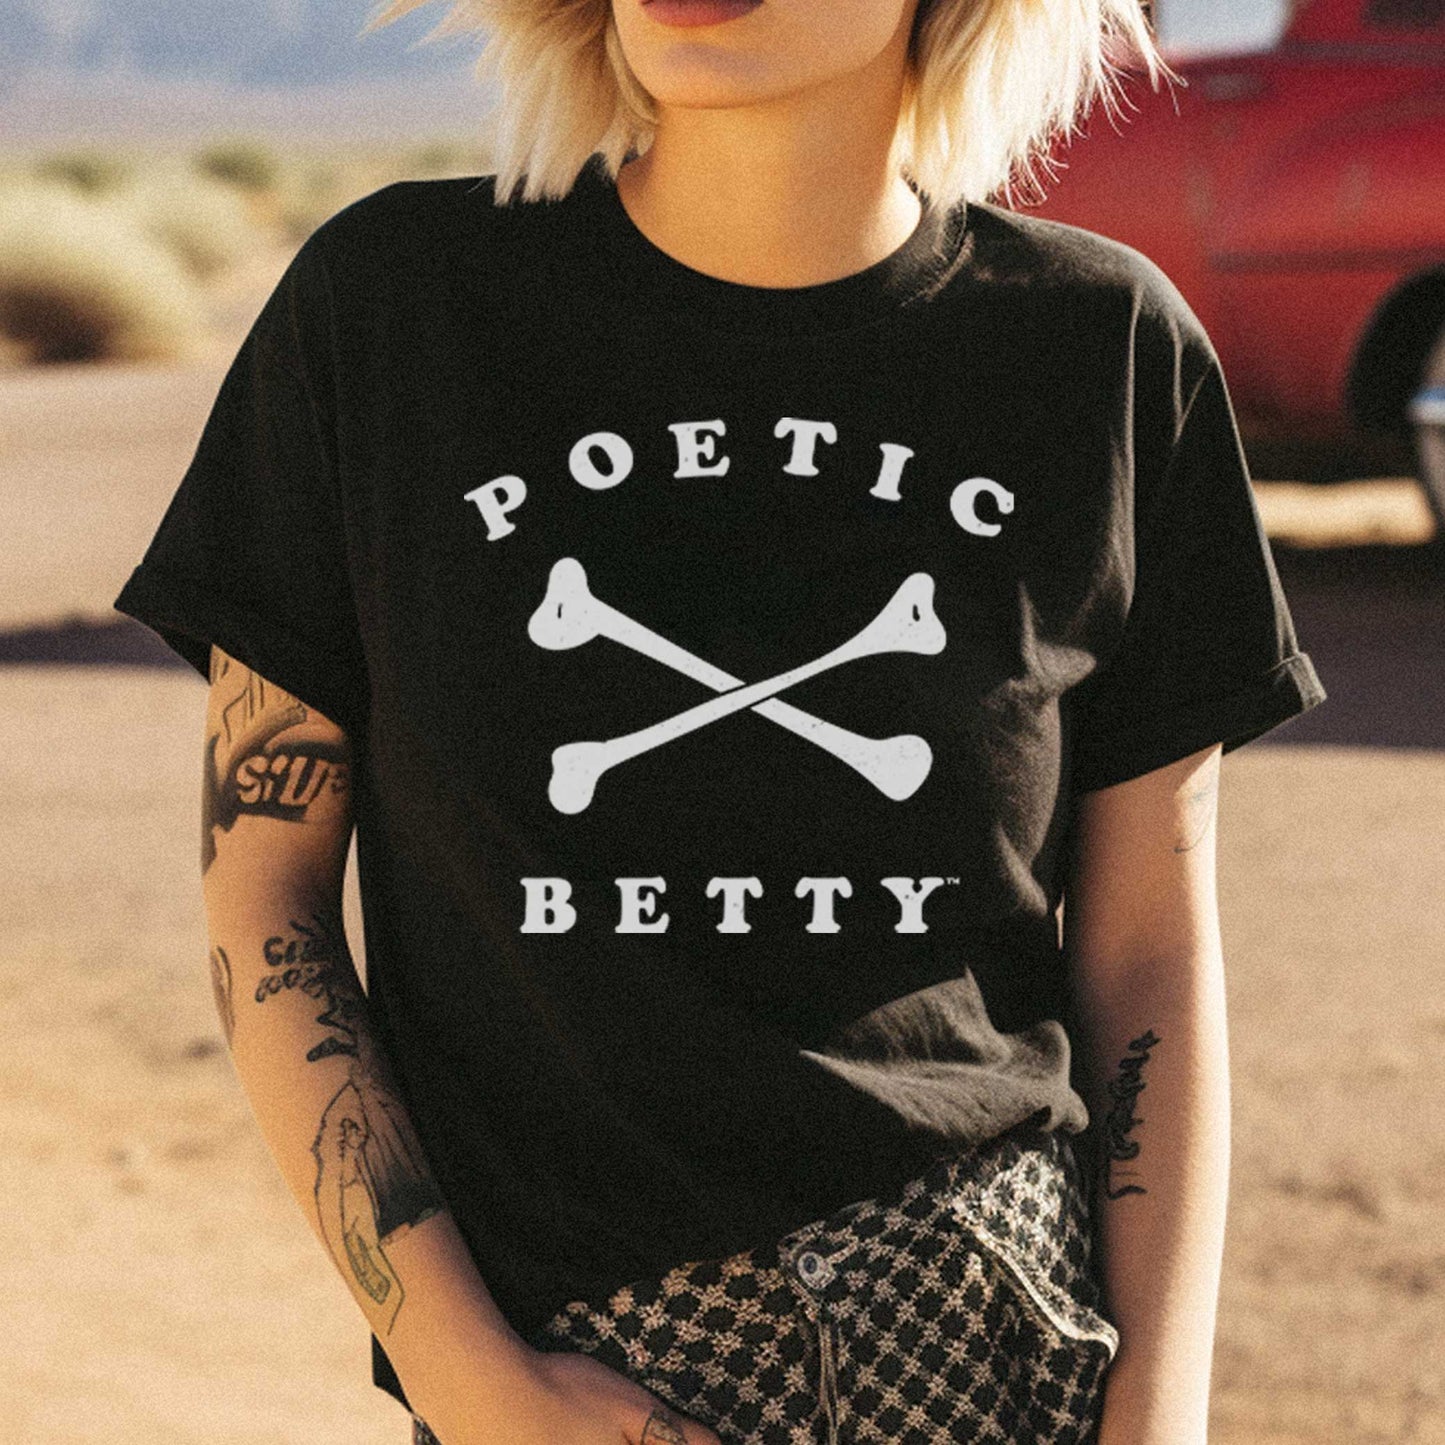 Poetic Betty™ Skull and Crossbones Since 2018 Emo 100% Cotton Unisex T-Shirt